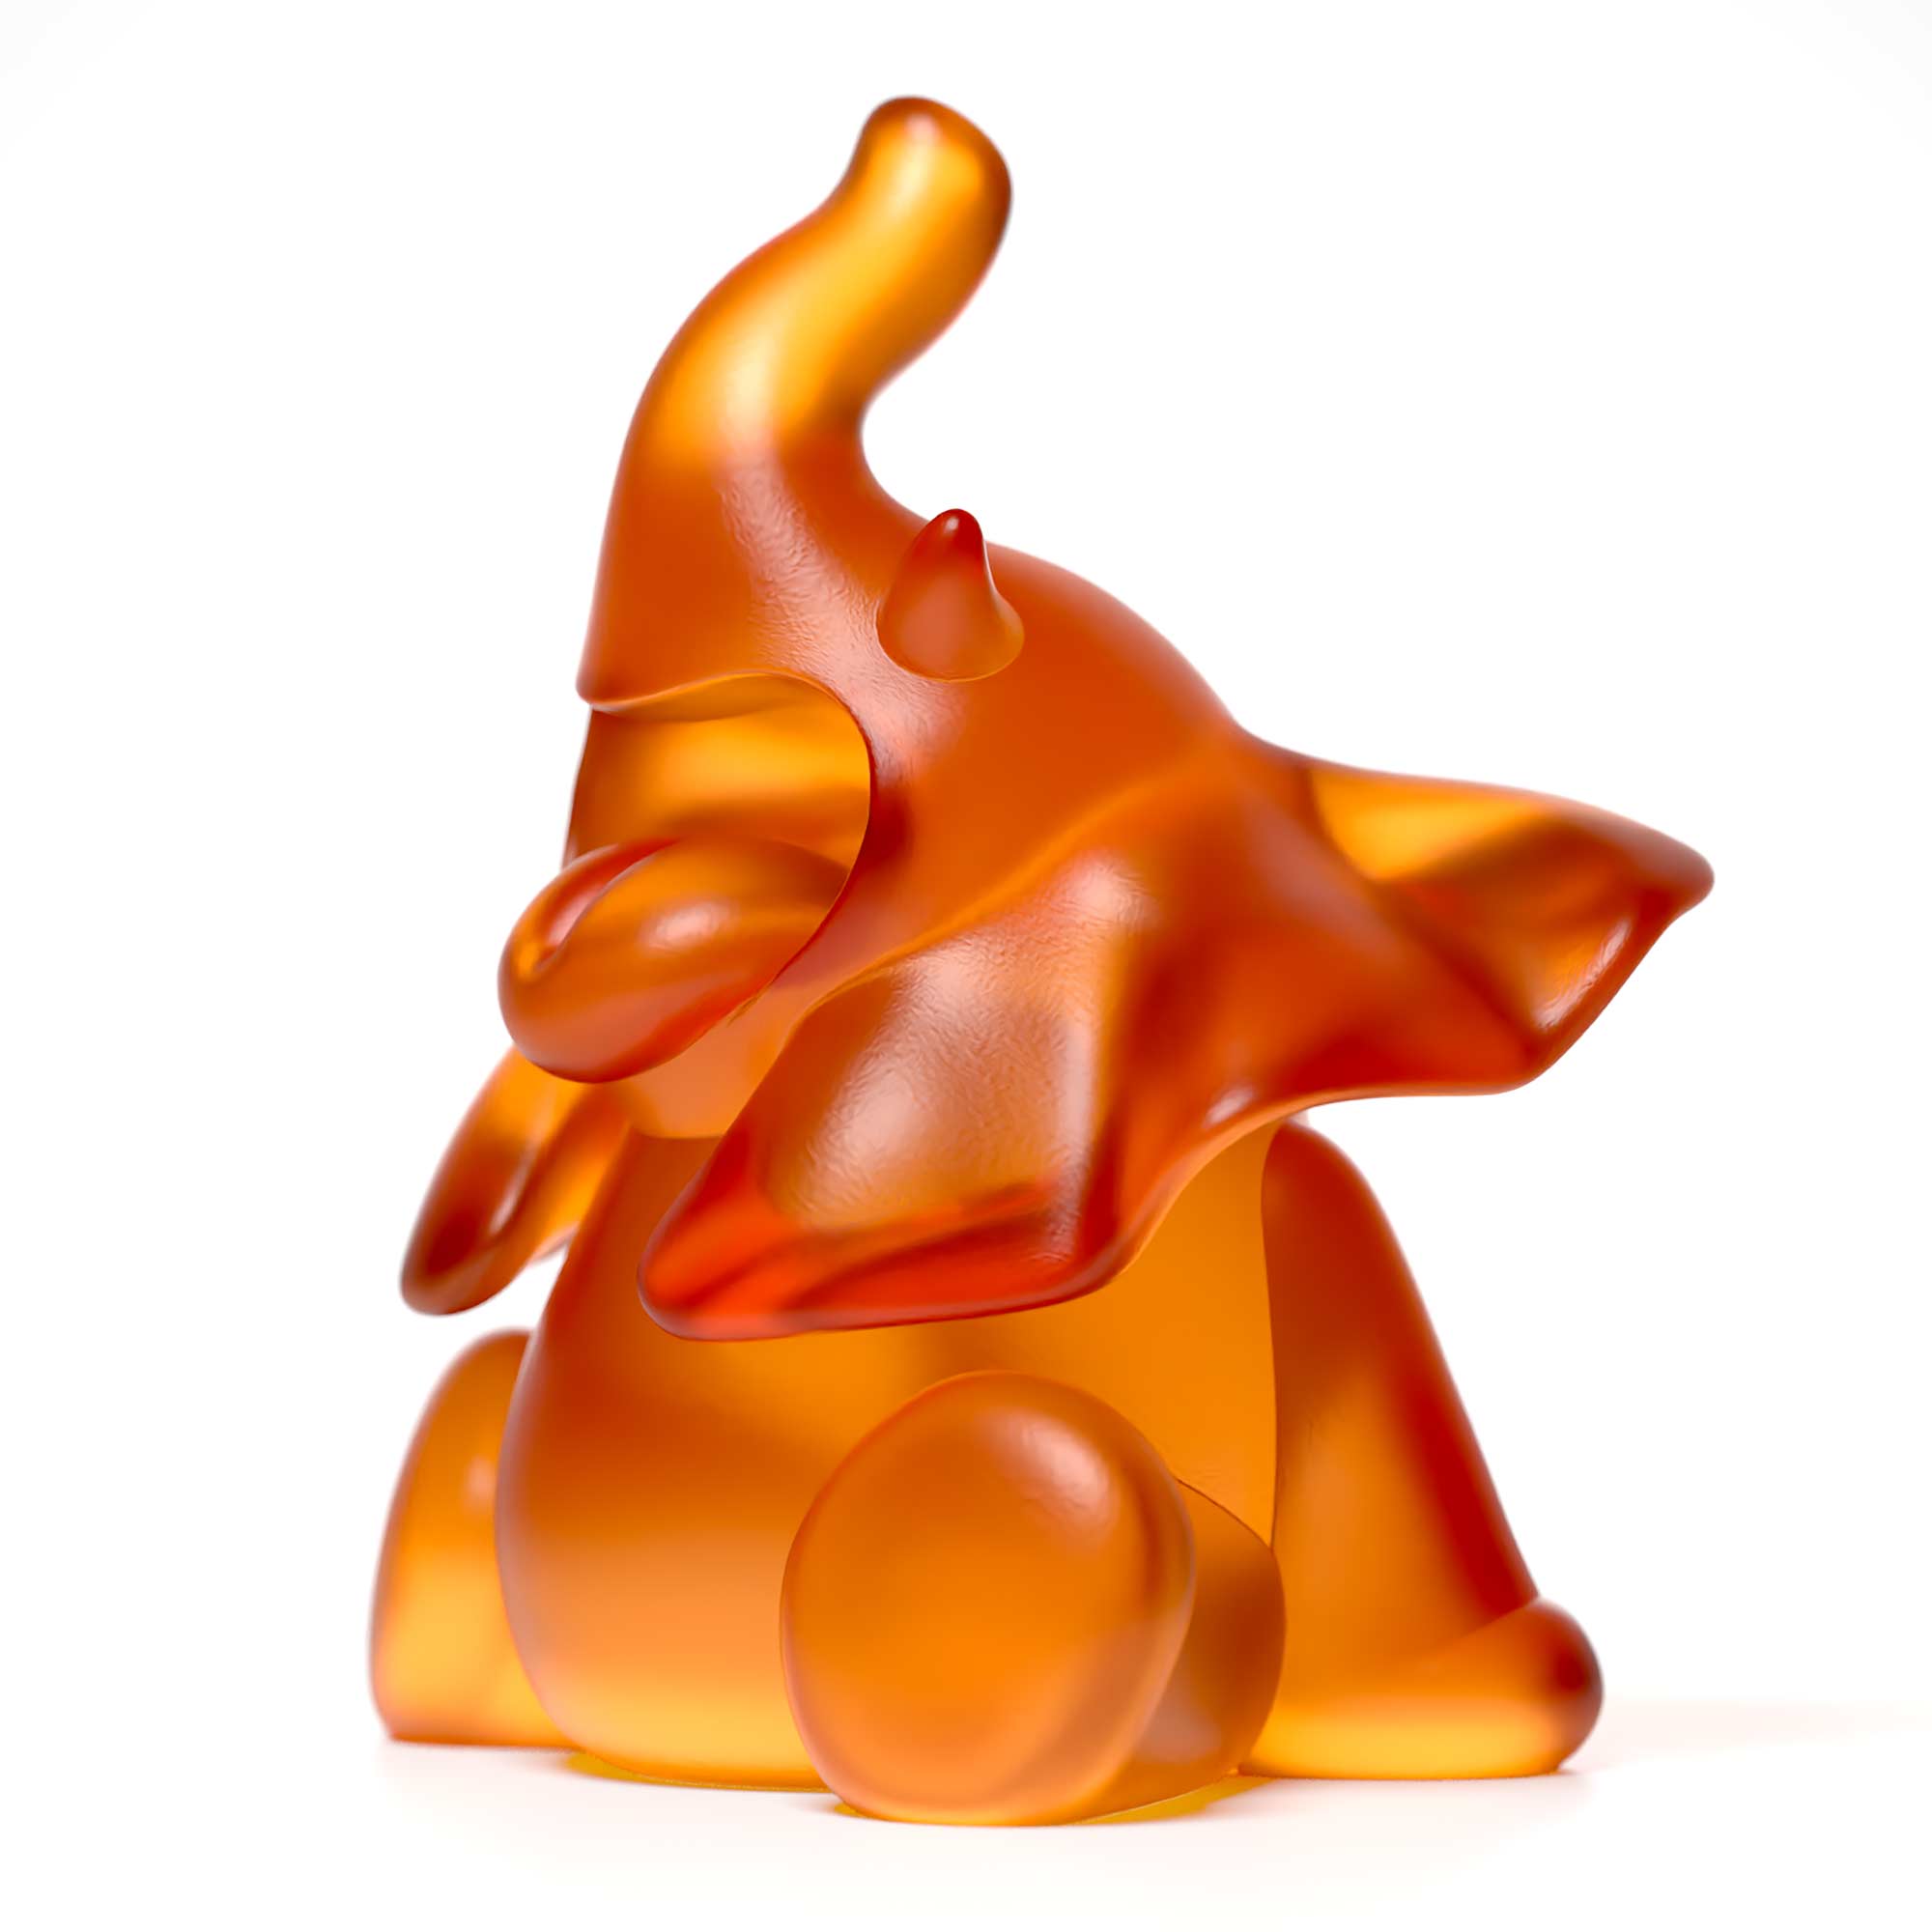 Ellie Roar, 18 cm height an elephant colour amber, Limited edition, designed by Ferdi B Dick, side view